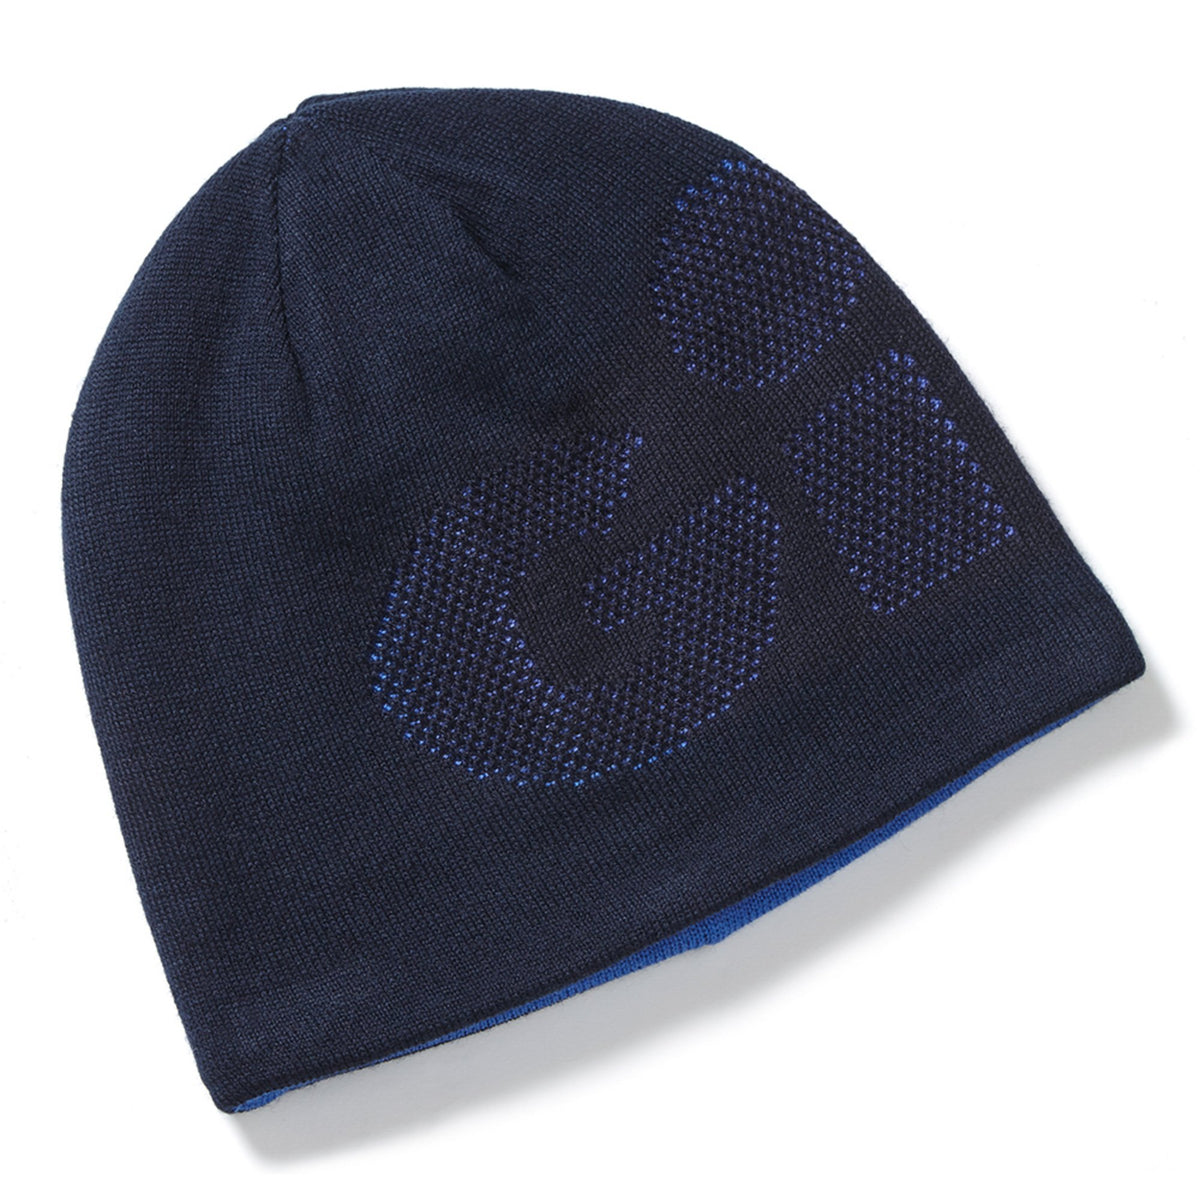 GILL Reversible Knit Beanie - One Size